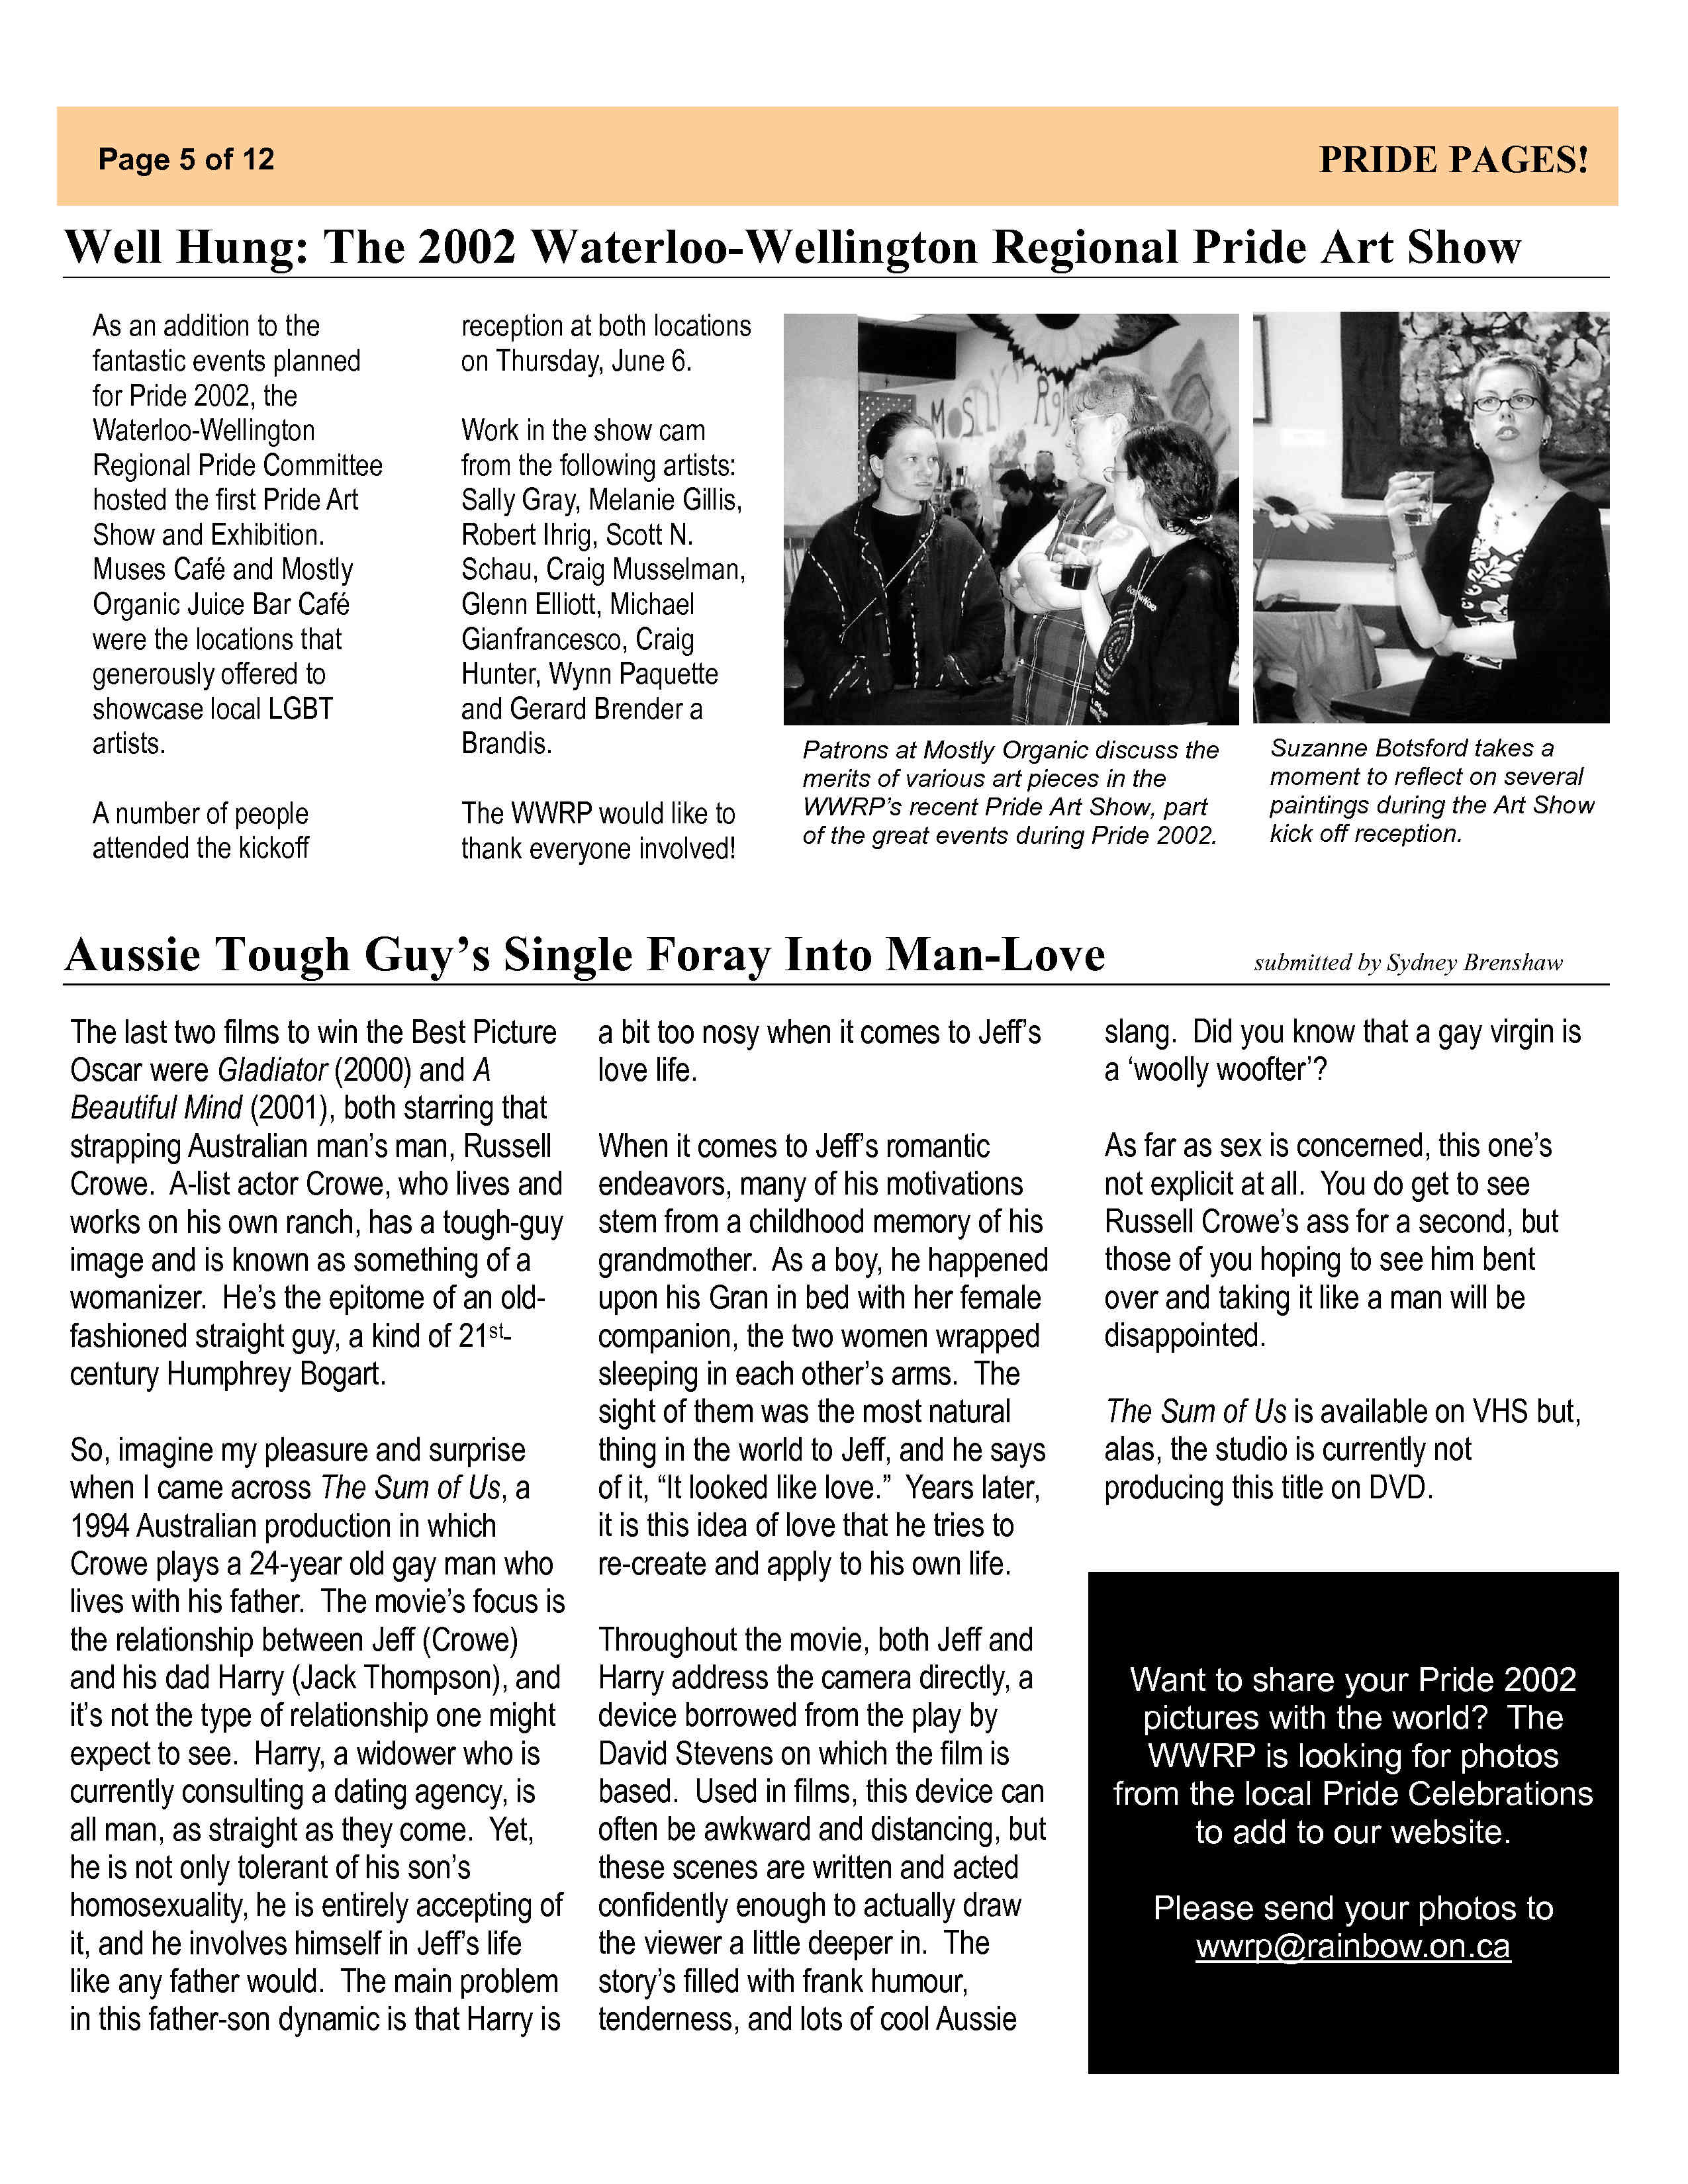 Pride Pages 2002-07 p5